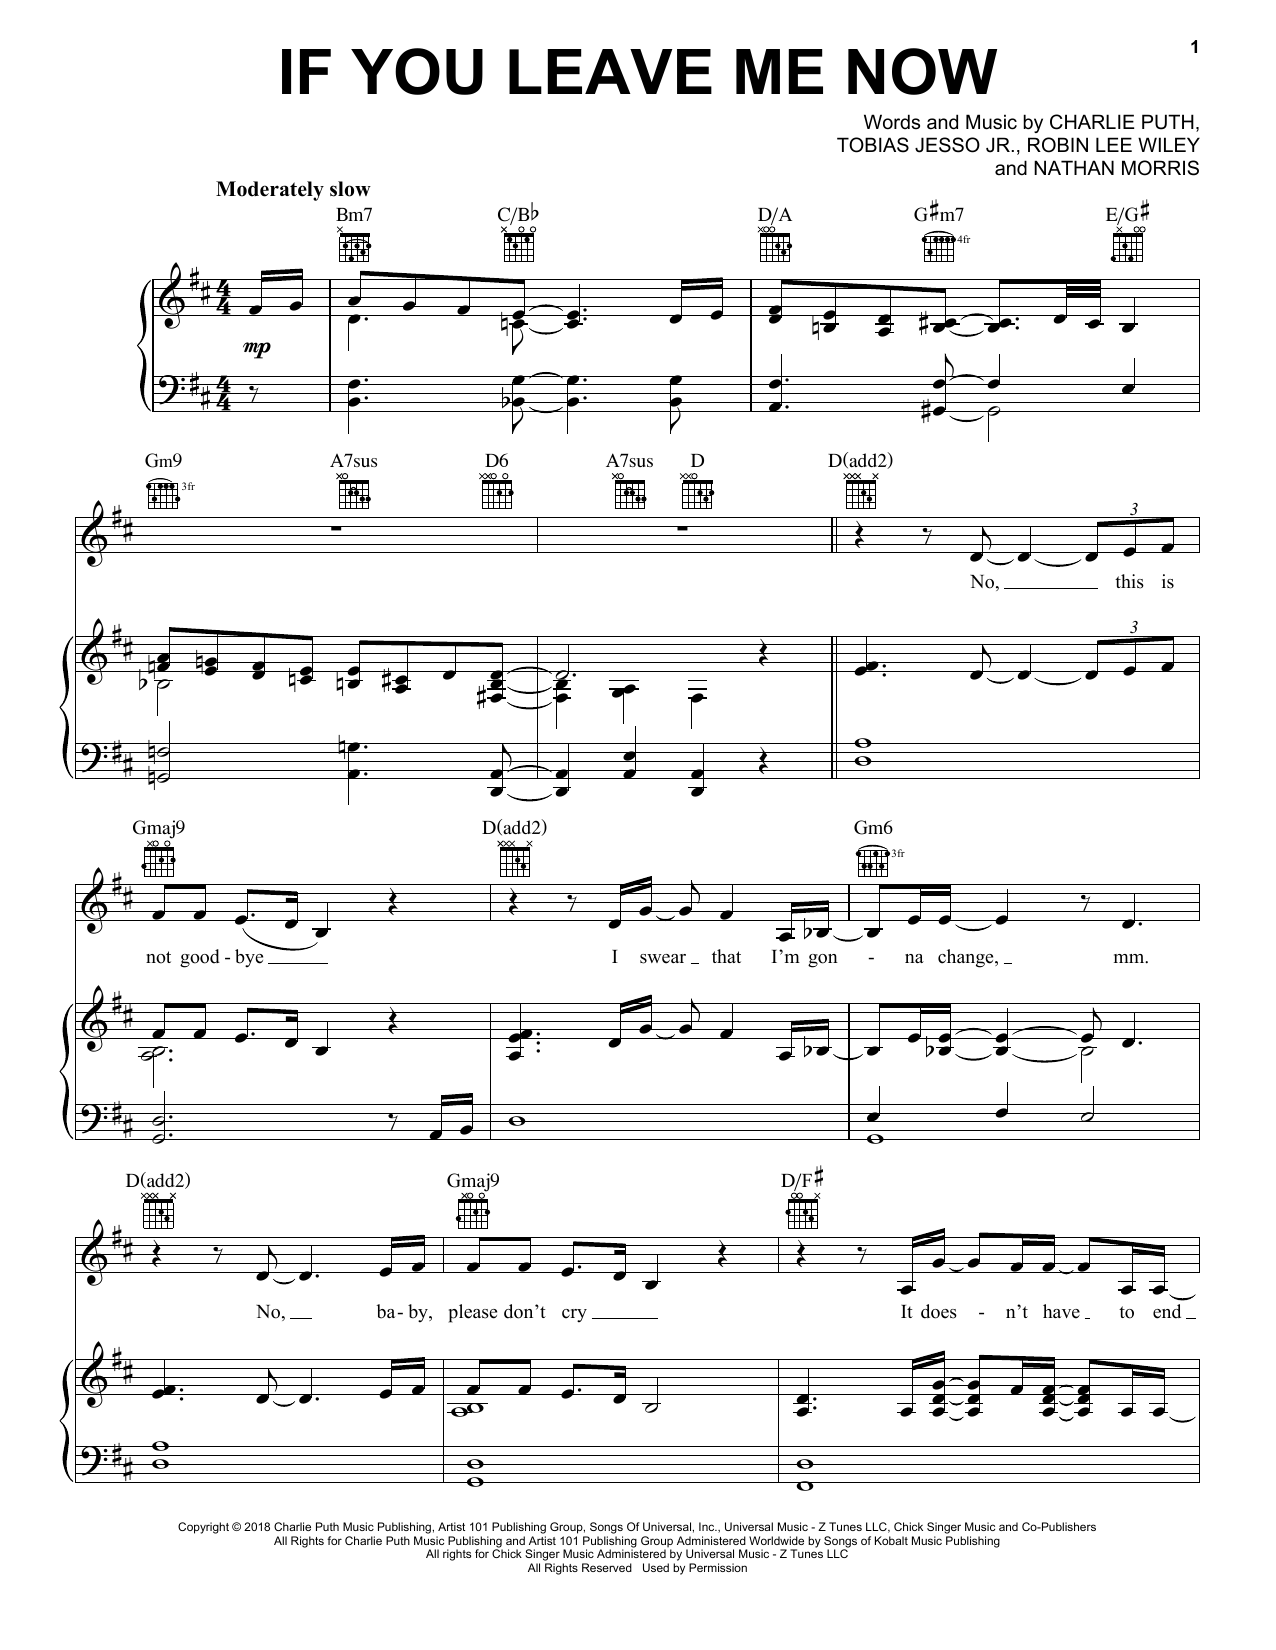 Download Charlie Puth feat. Boyz II Men If You Leave Me Now Sheet Music